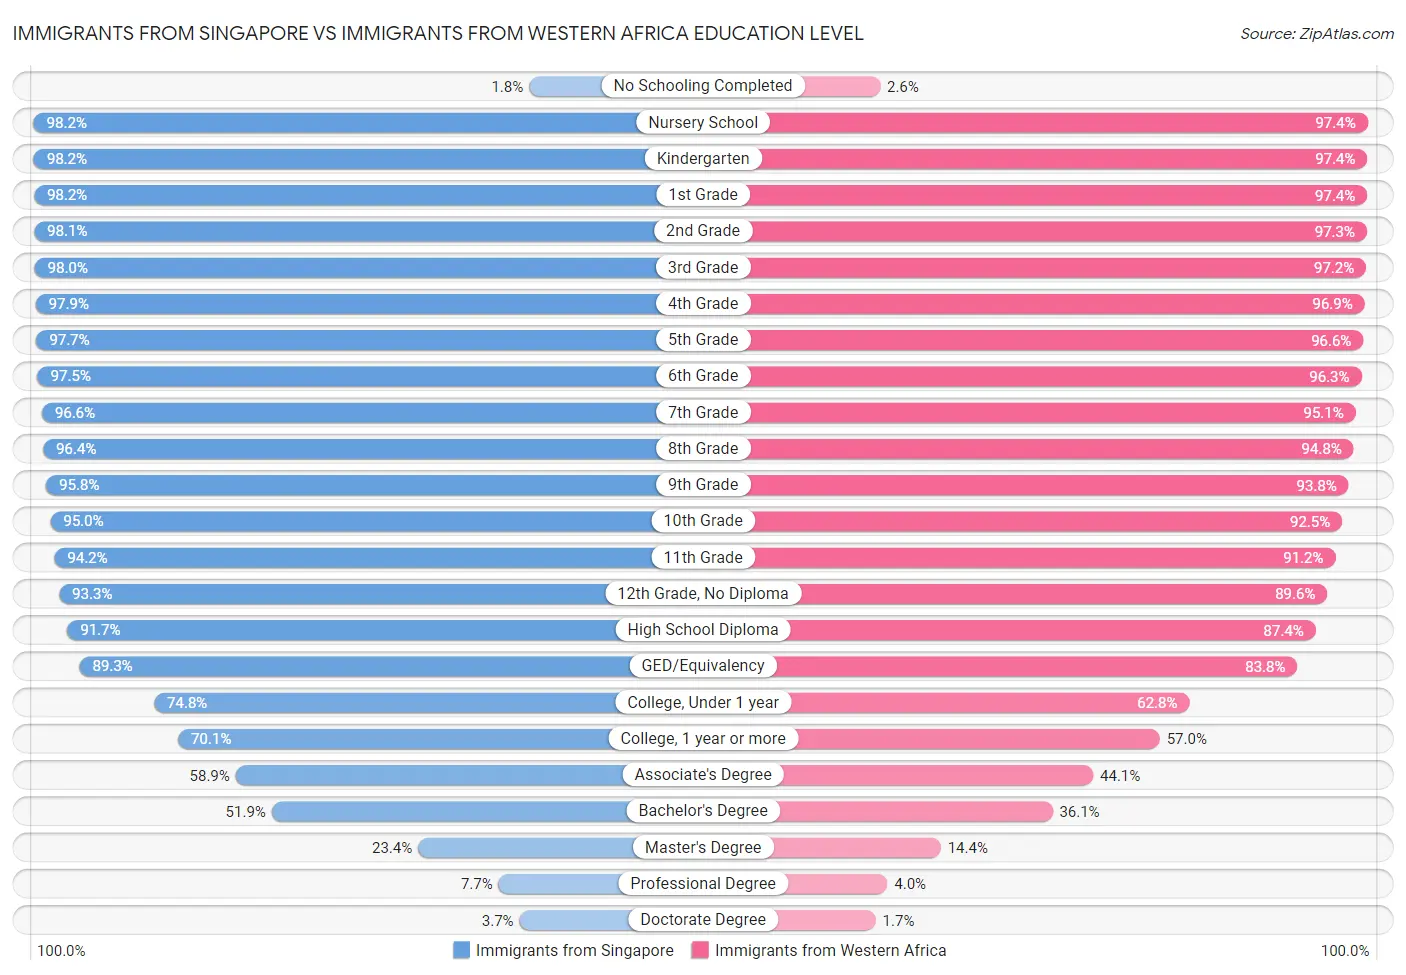 Immigrants from Singapore vs Immigrants from Western Africa Education Level